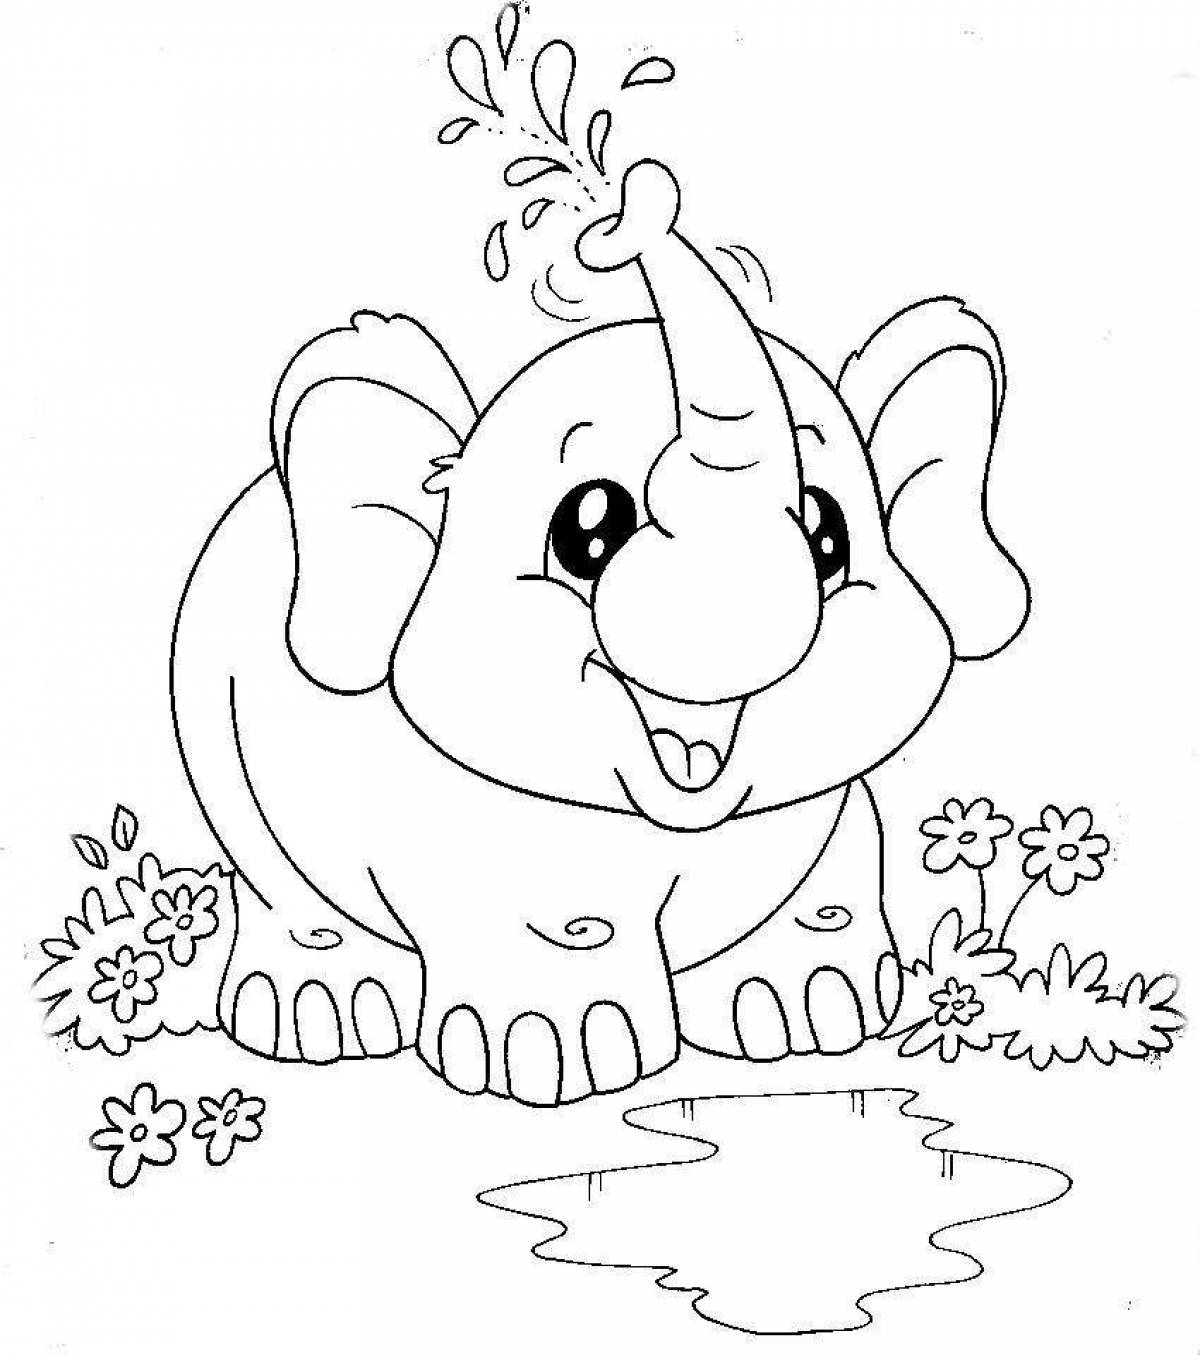 Amazing elephant coloring pages for kids